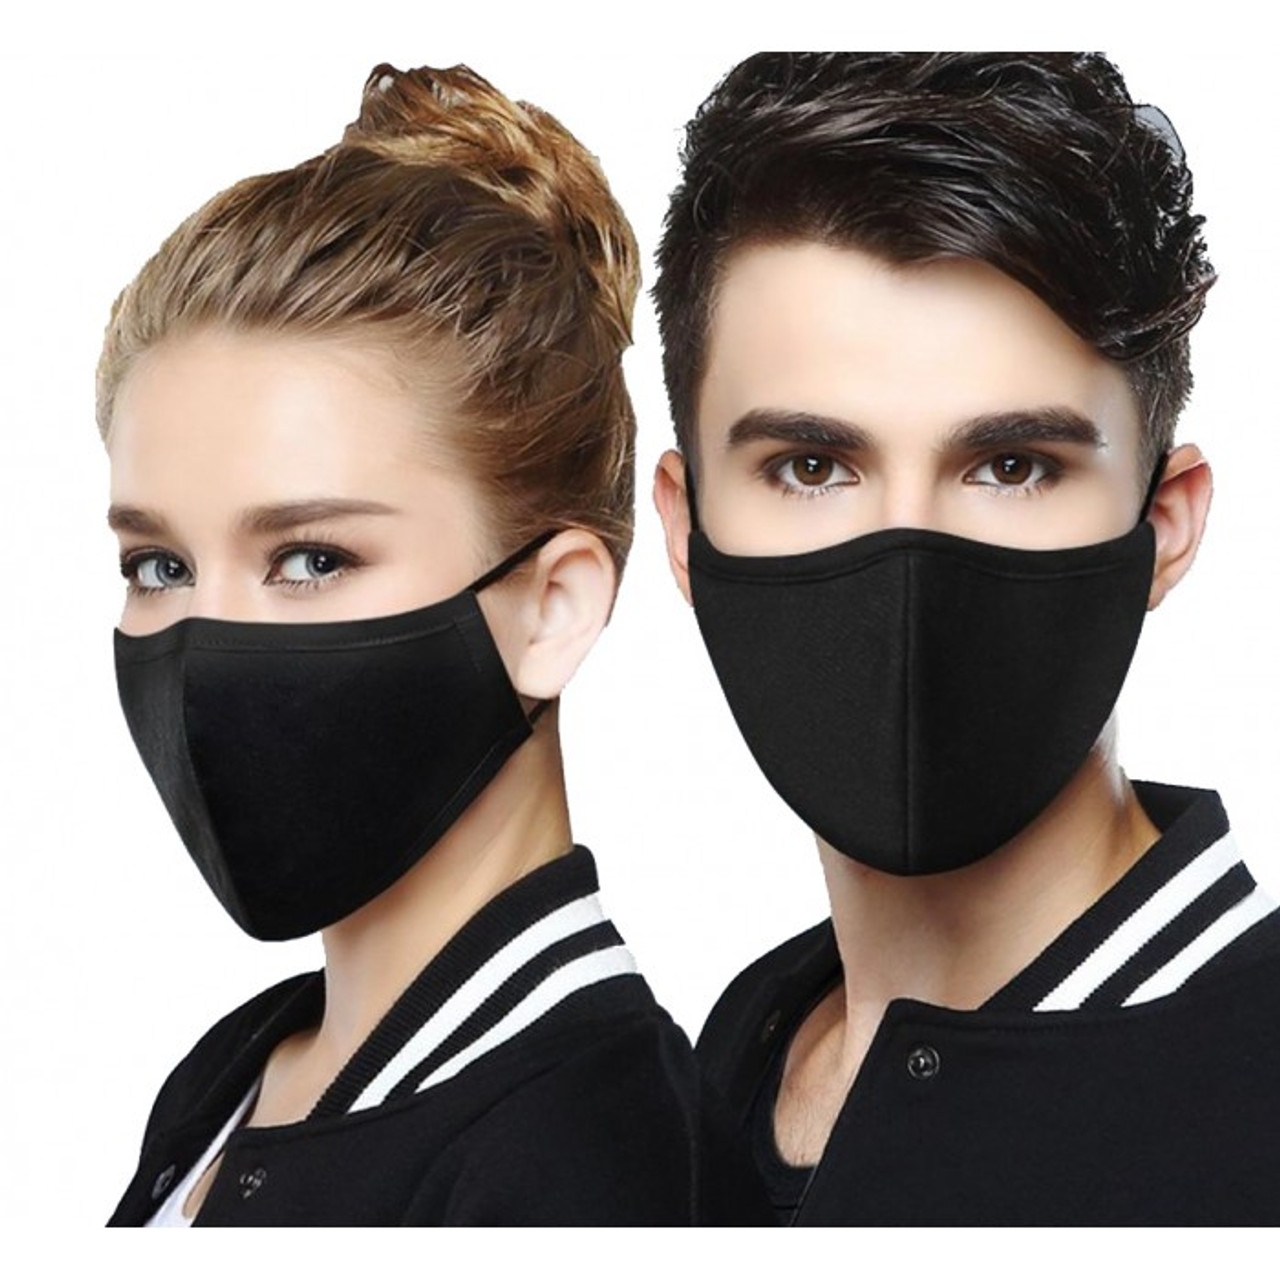 Veodhekai Men and Women Reusable Breathable Filter Safety Protection Full Face Mouth Hood 